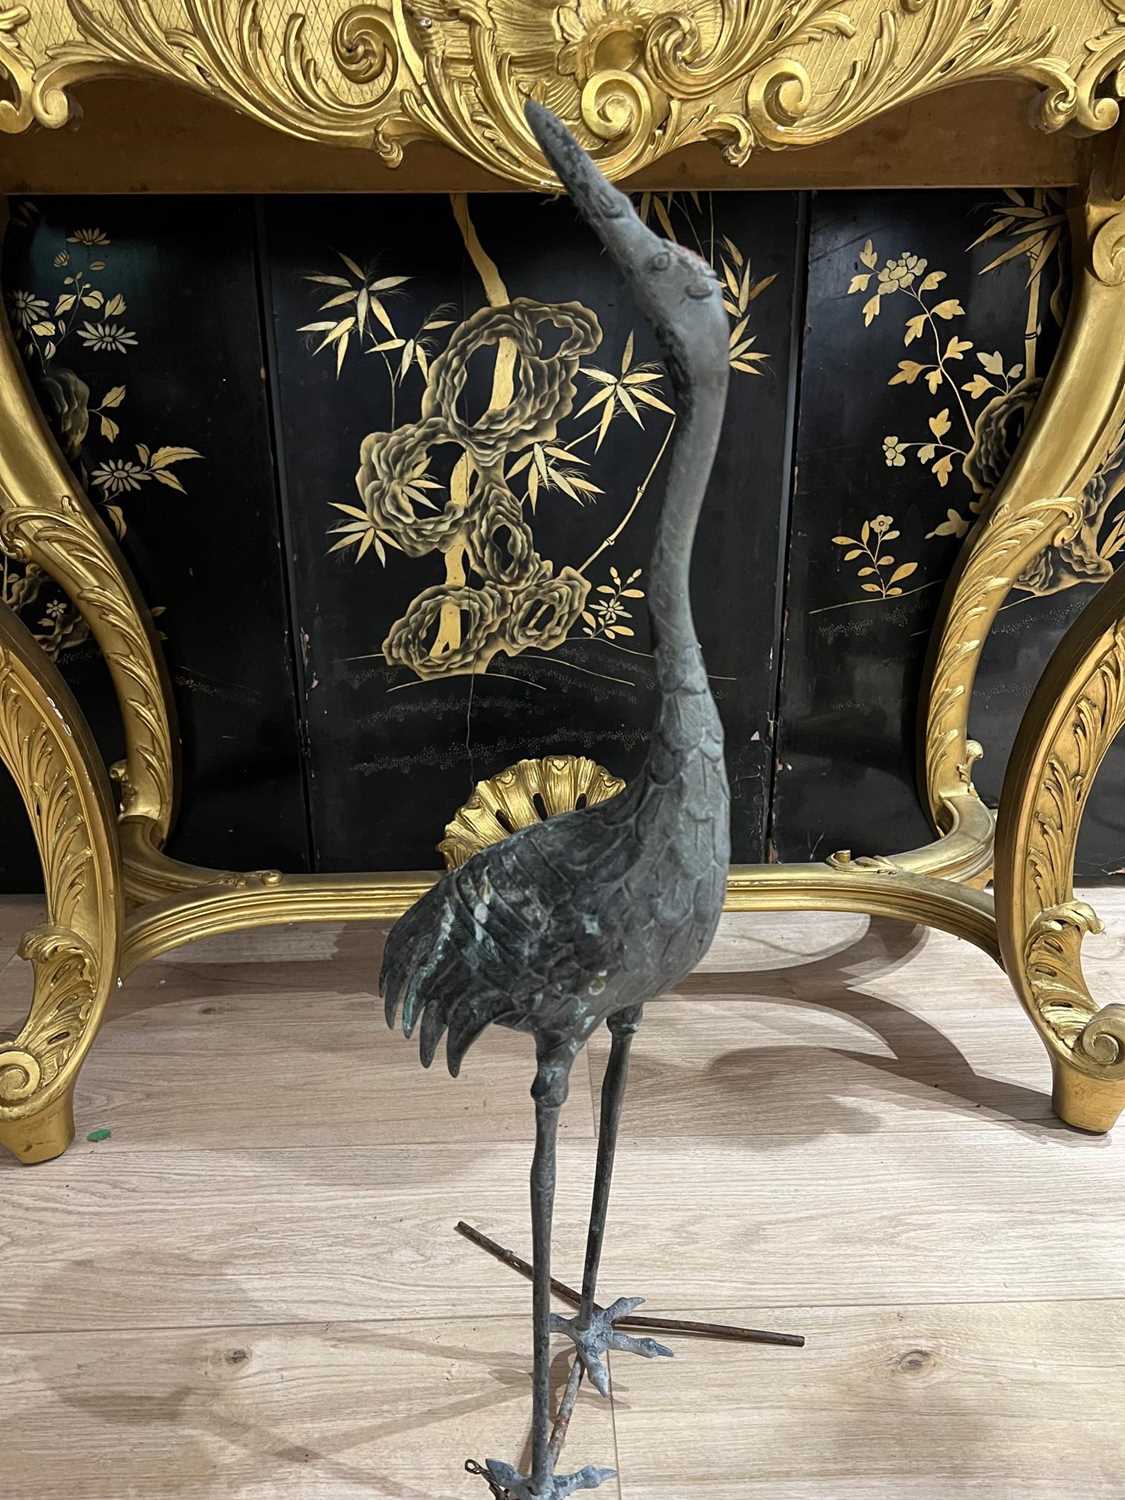 A MEIJI PERIOD LIFE SIZE BRONZE MODEL OF A RED-CROWNED CRANE - Image 2 of 3